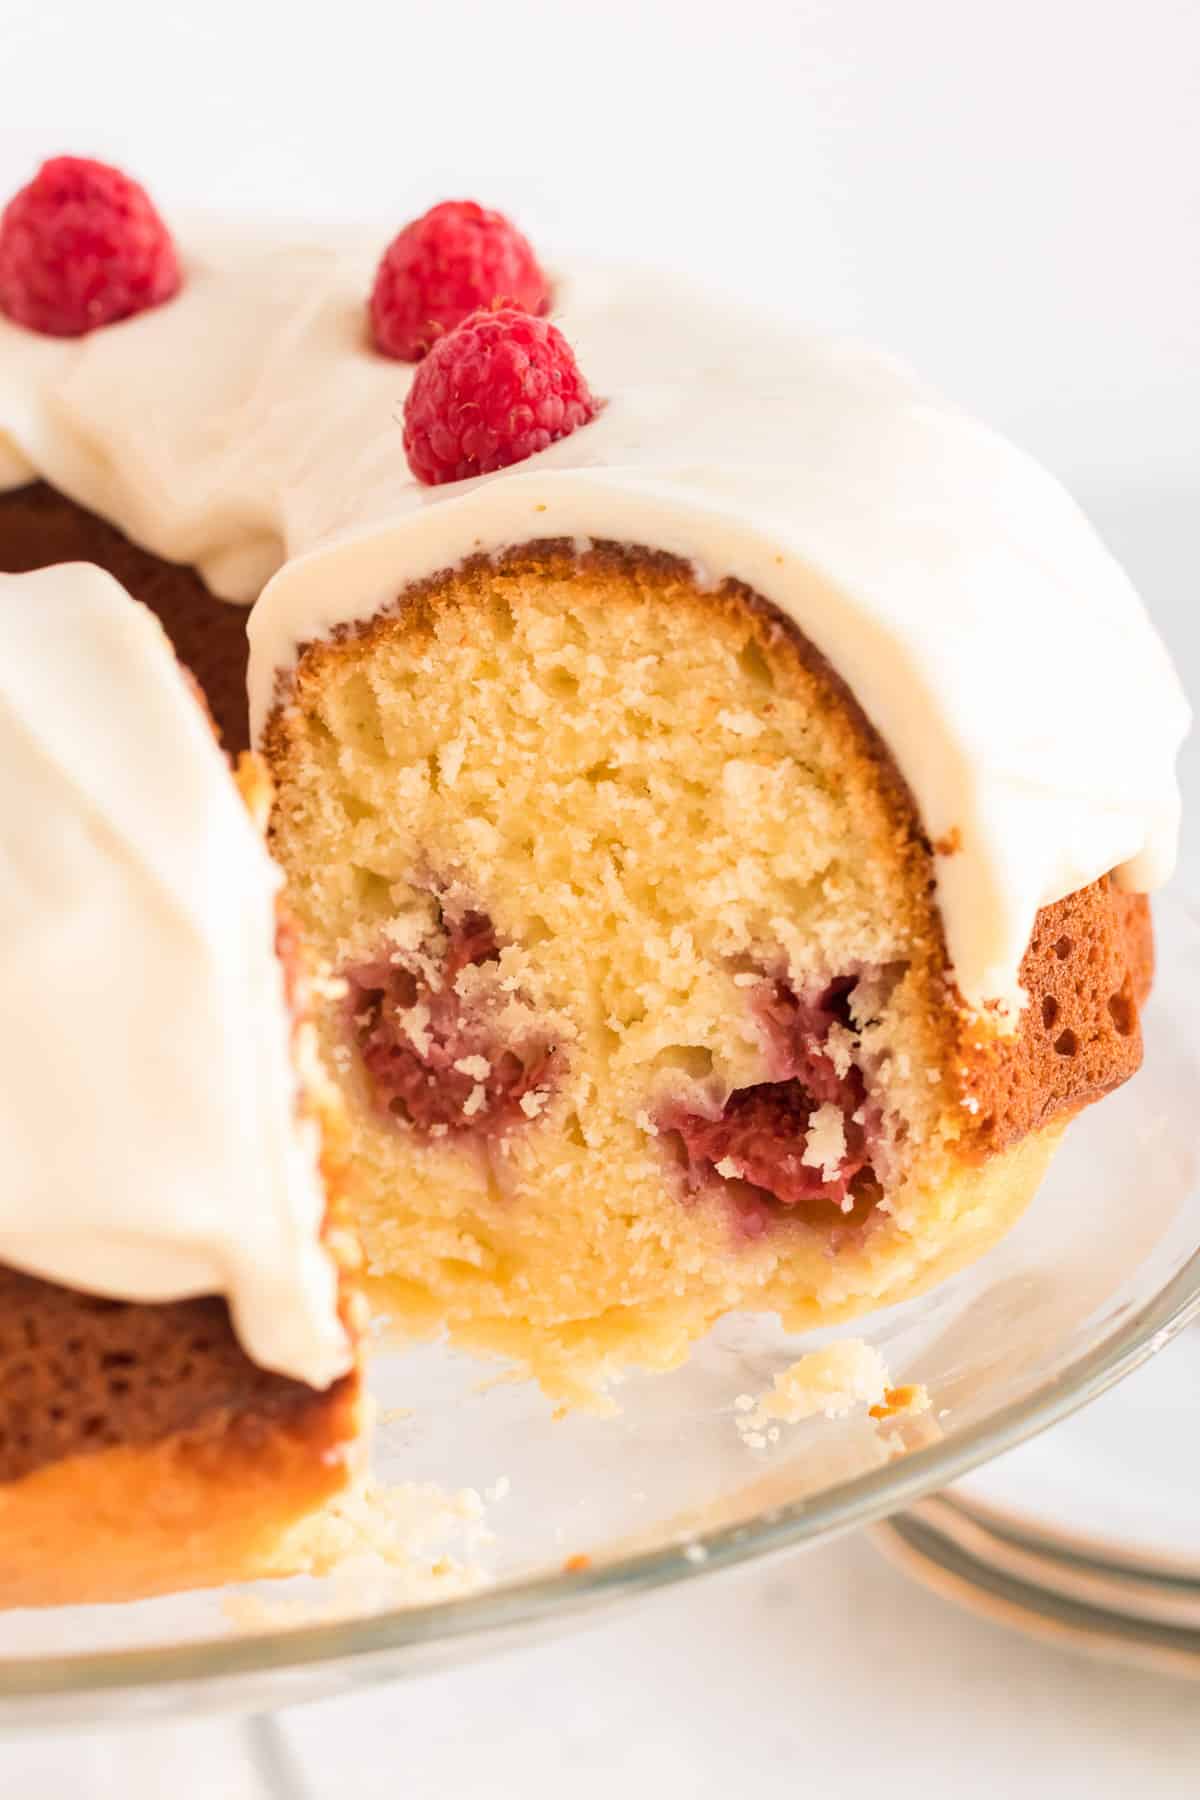 A side view of the Lemon Raspberry Bundt Cake with a slice missing revealing the center.